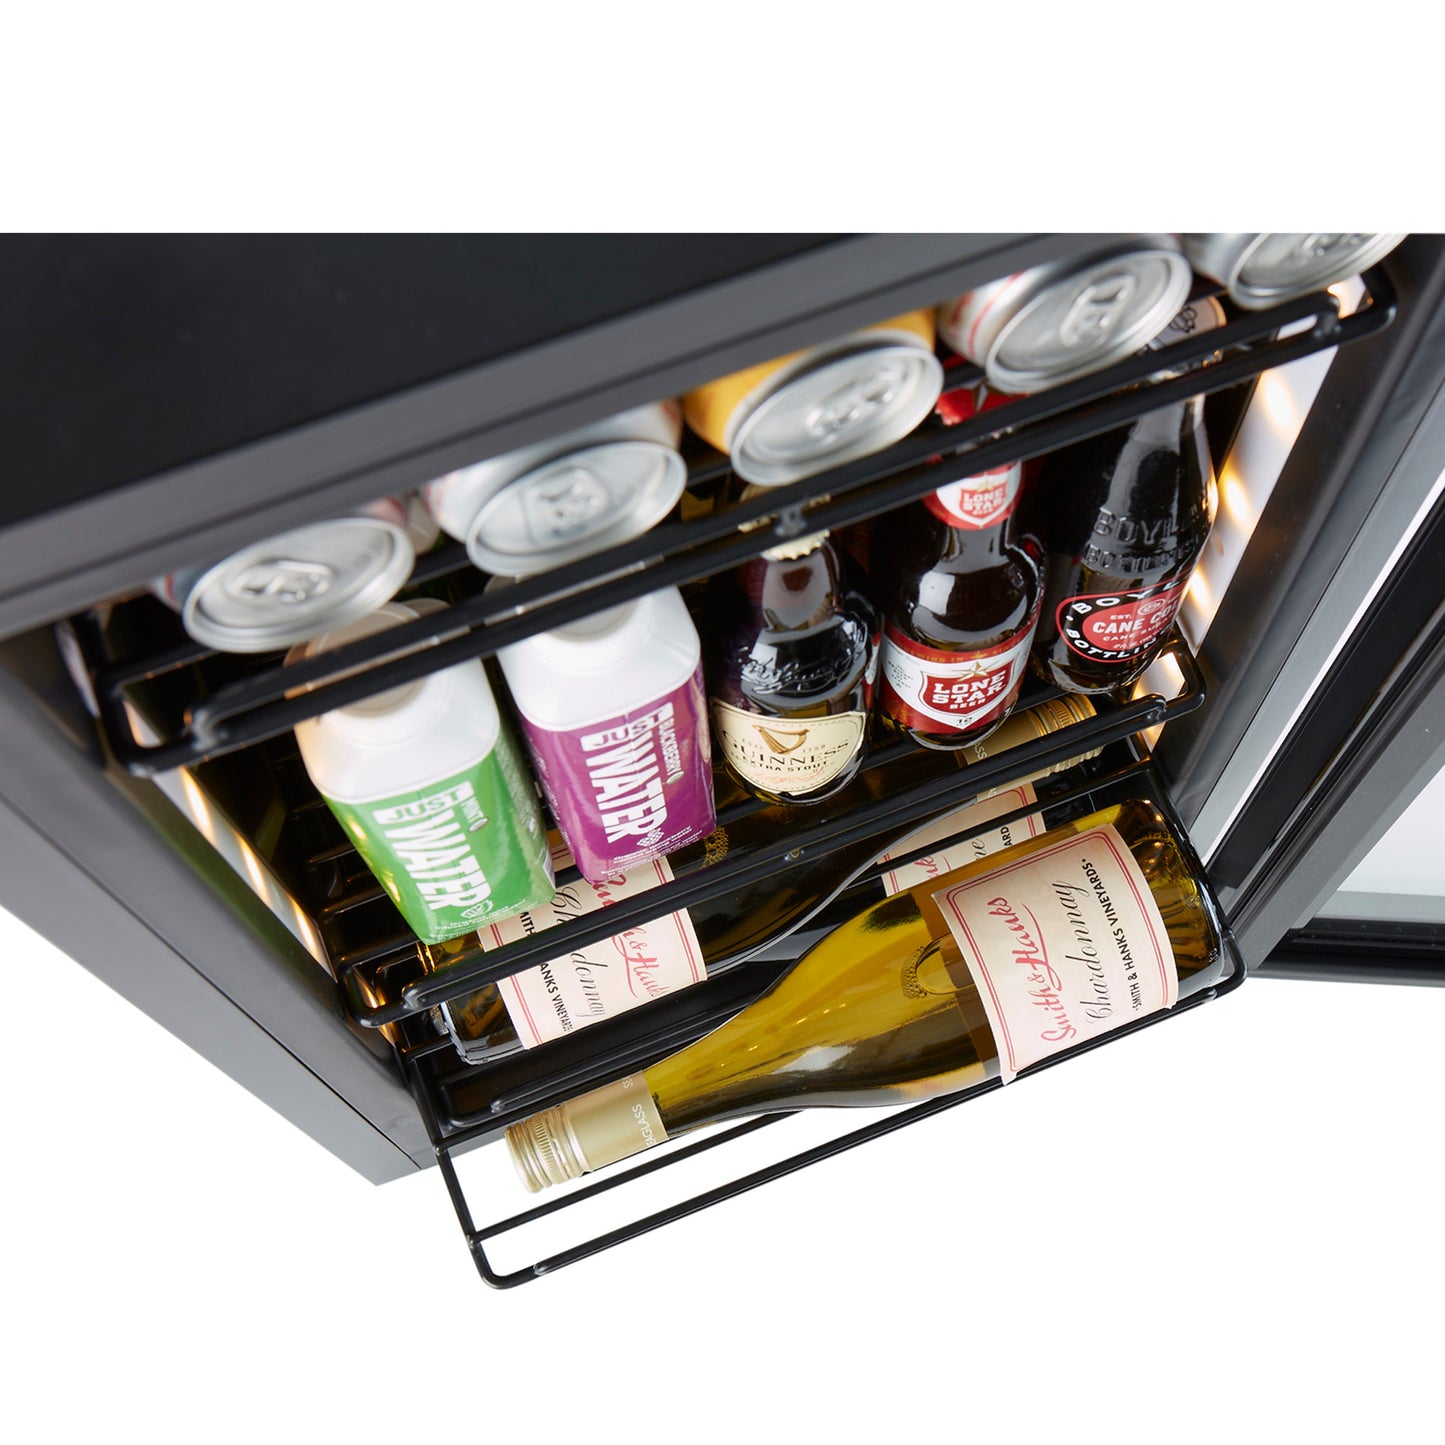 Buy a Smith & Hanks 80 Can Freestanding Beverage Cooler by Chilled Beverages